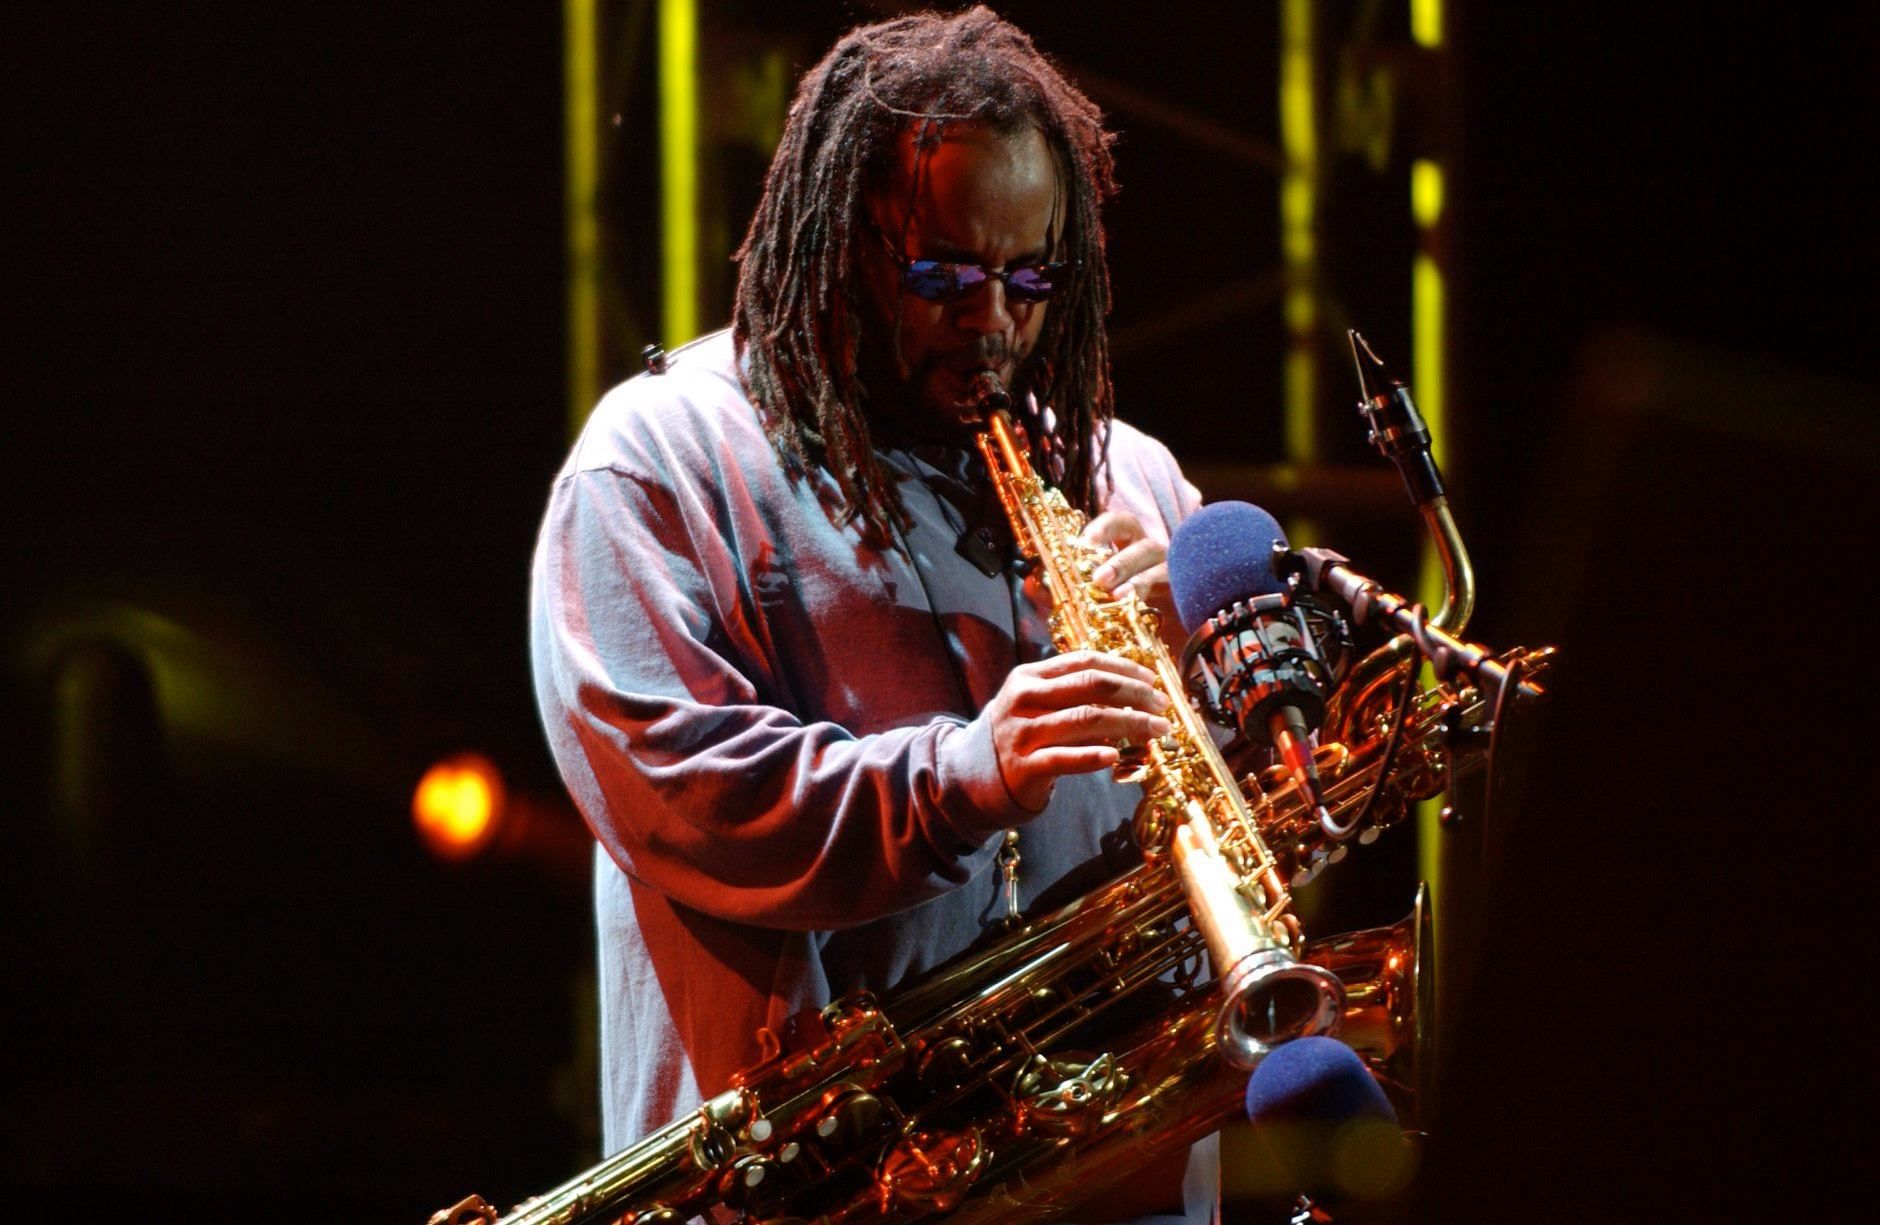 19 Fascinating Facts About LeRoi Moore - Facts.net